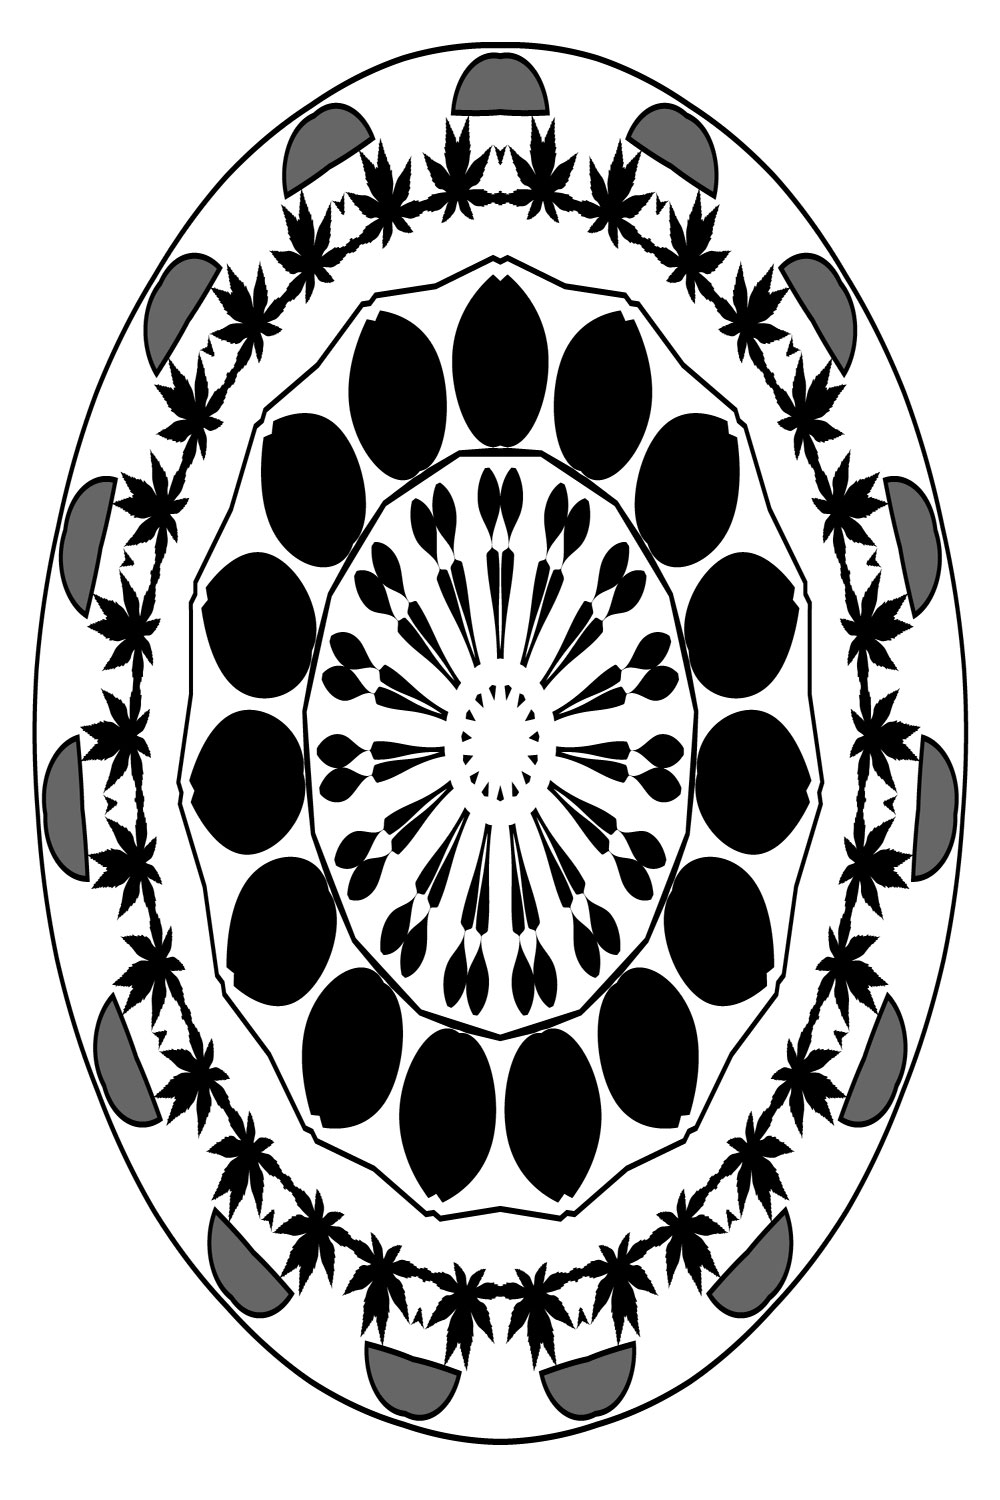 Mandala Art leaf in black and white pinterest preview image.